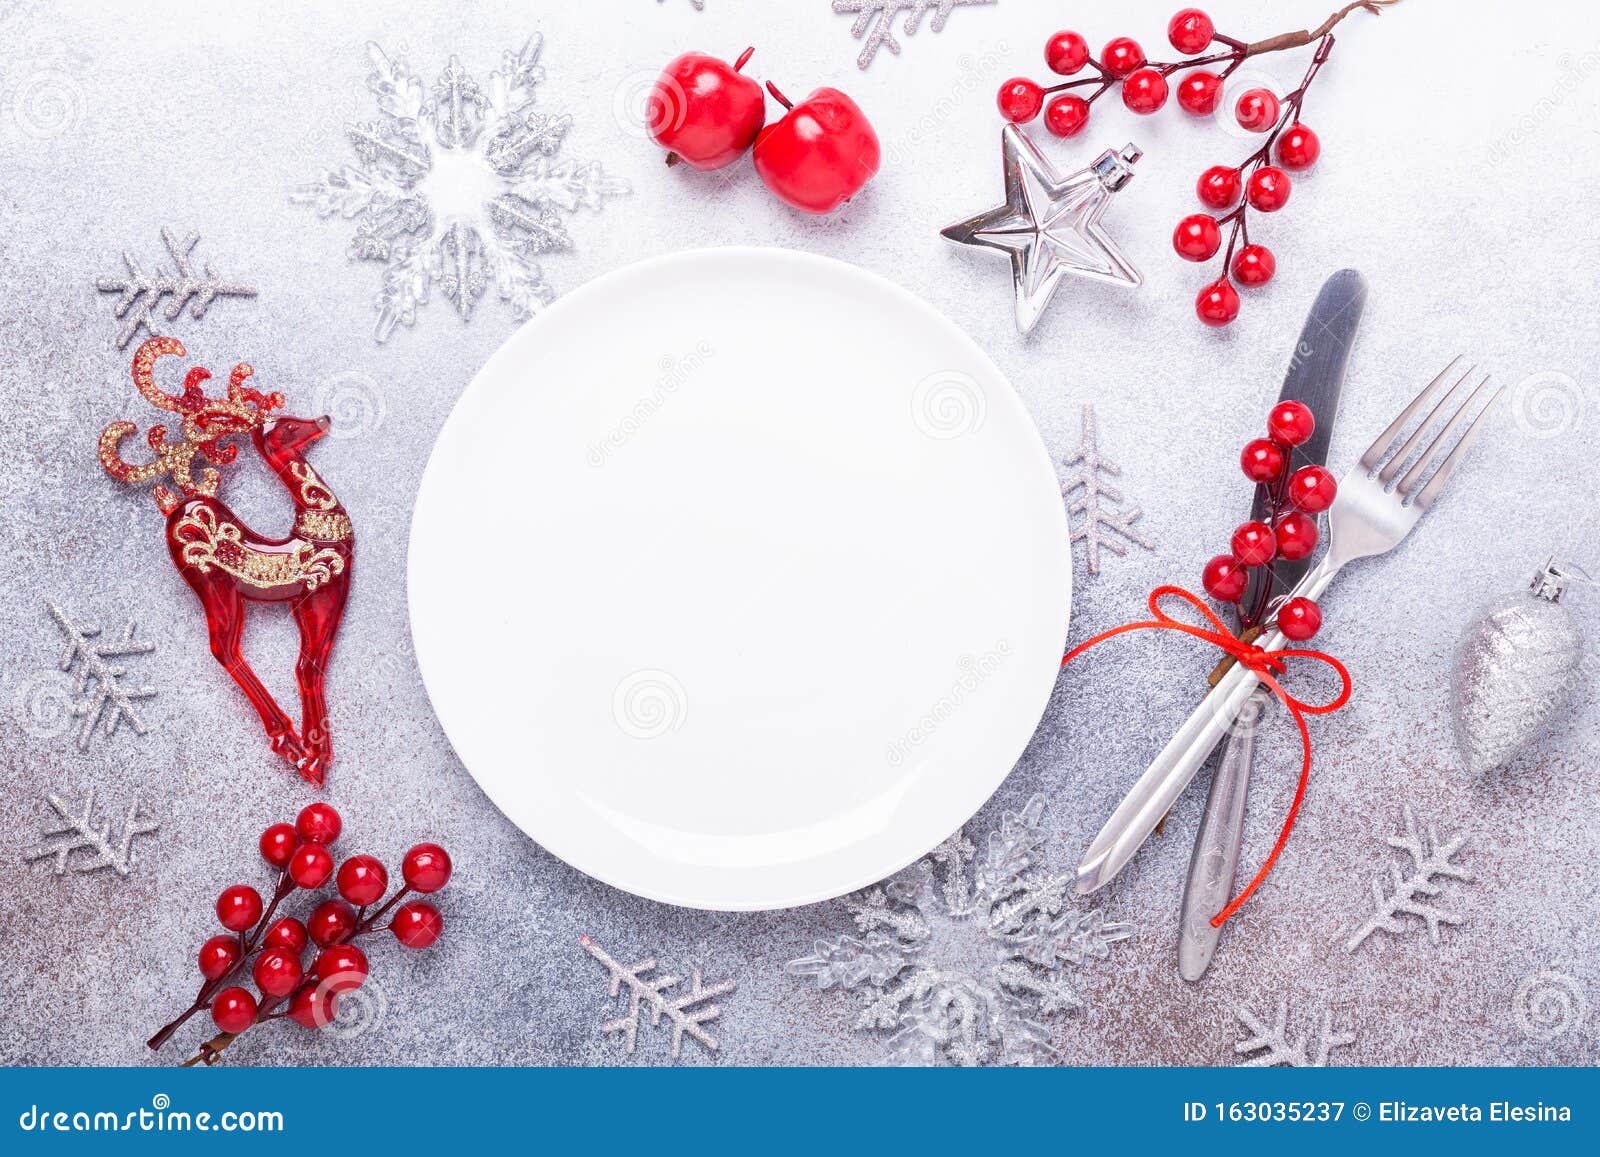 Christmas Table Place Setting with Empty White Plate, Cutlery with ...